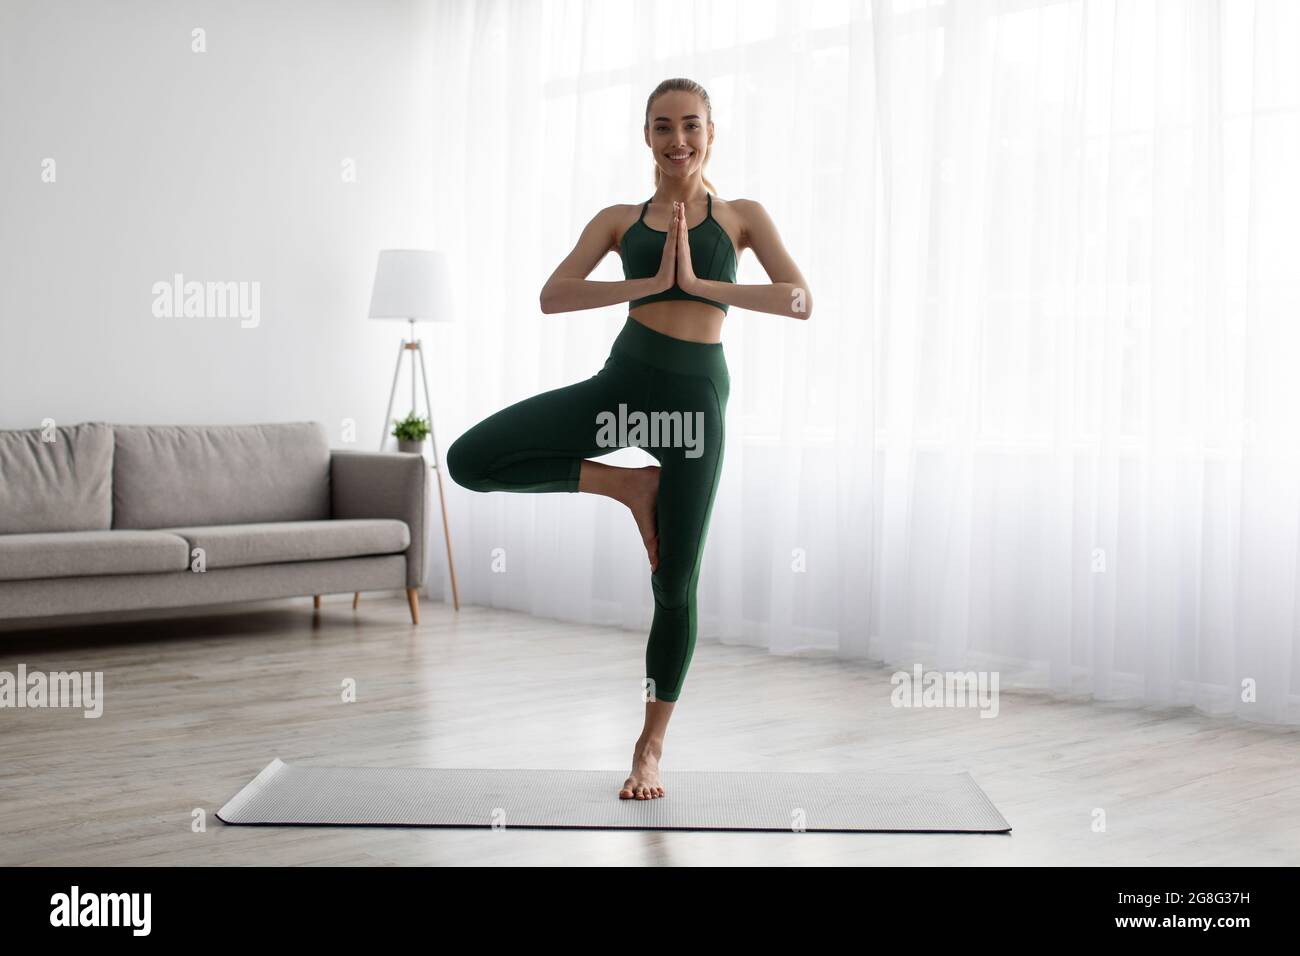 Calm young female practicing yoga, exercises in living room, healthy lifestyle Stock Photo